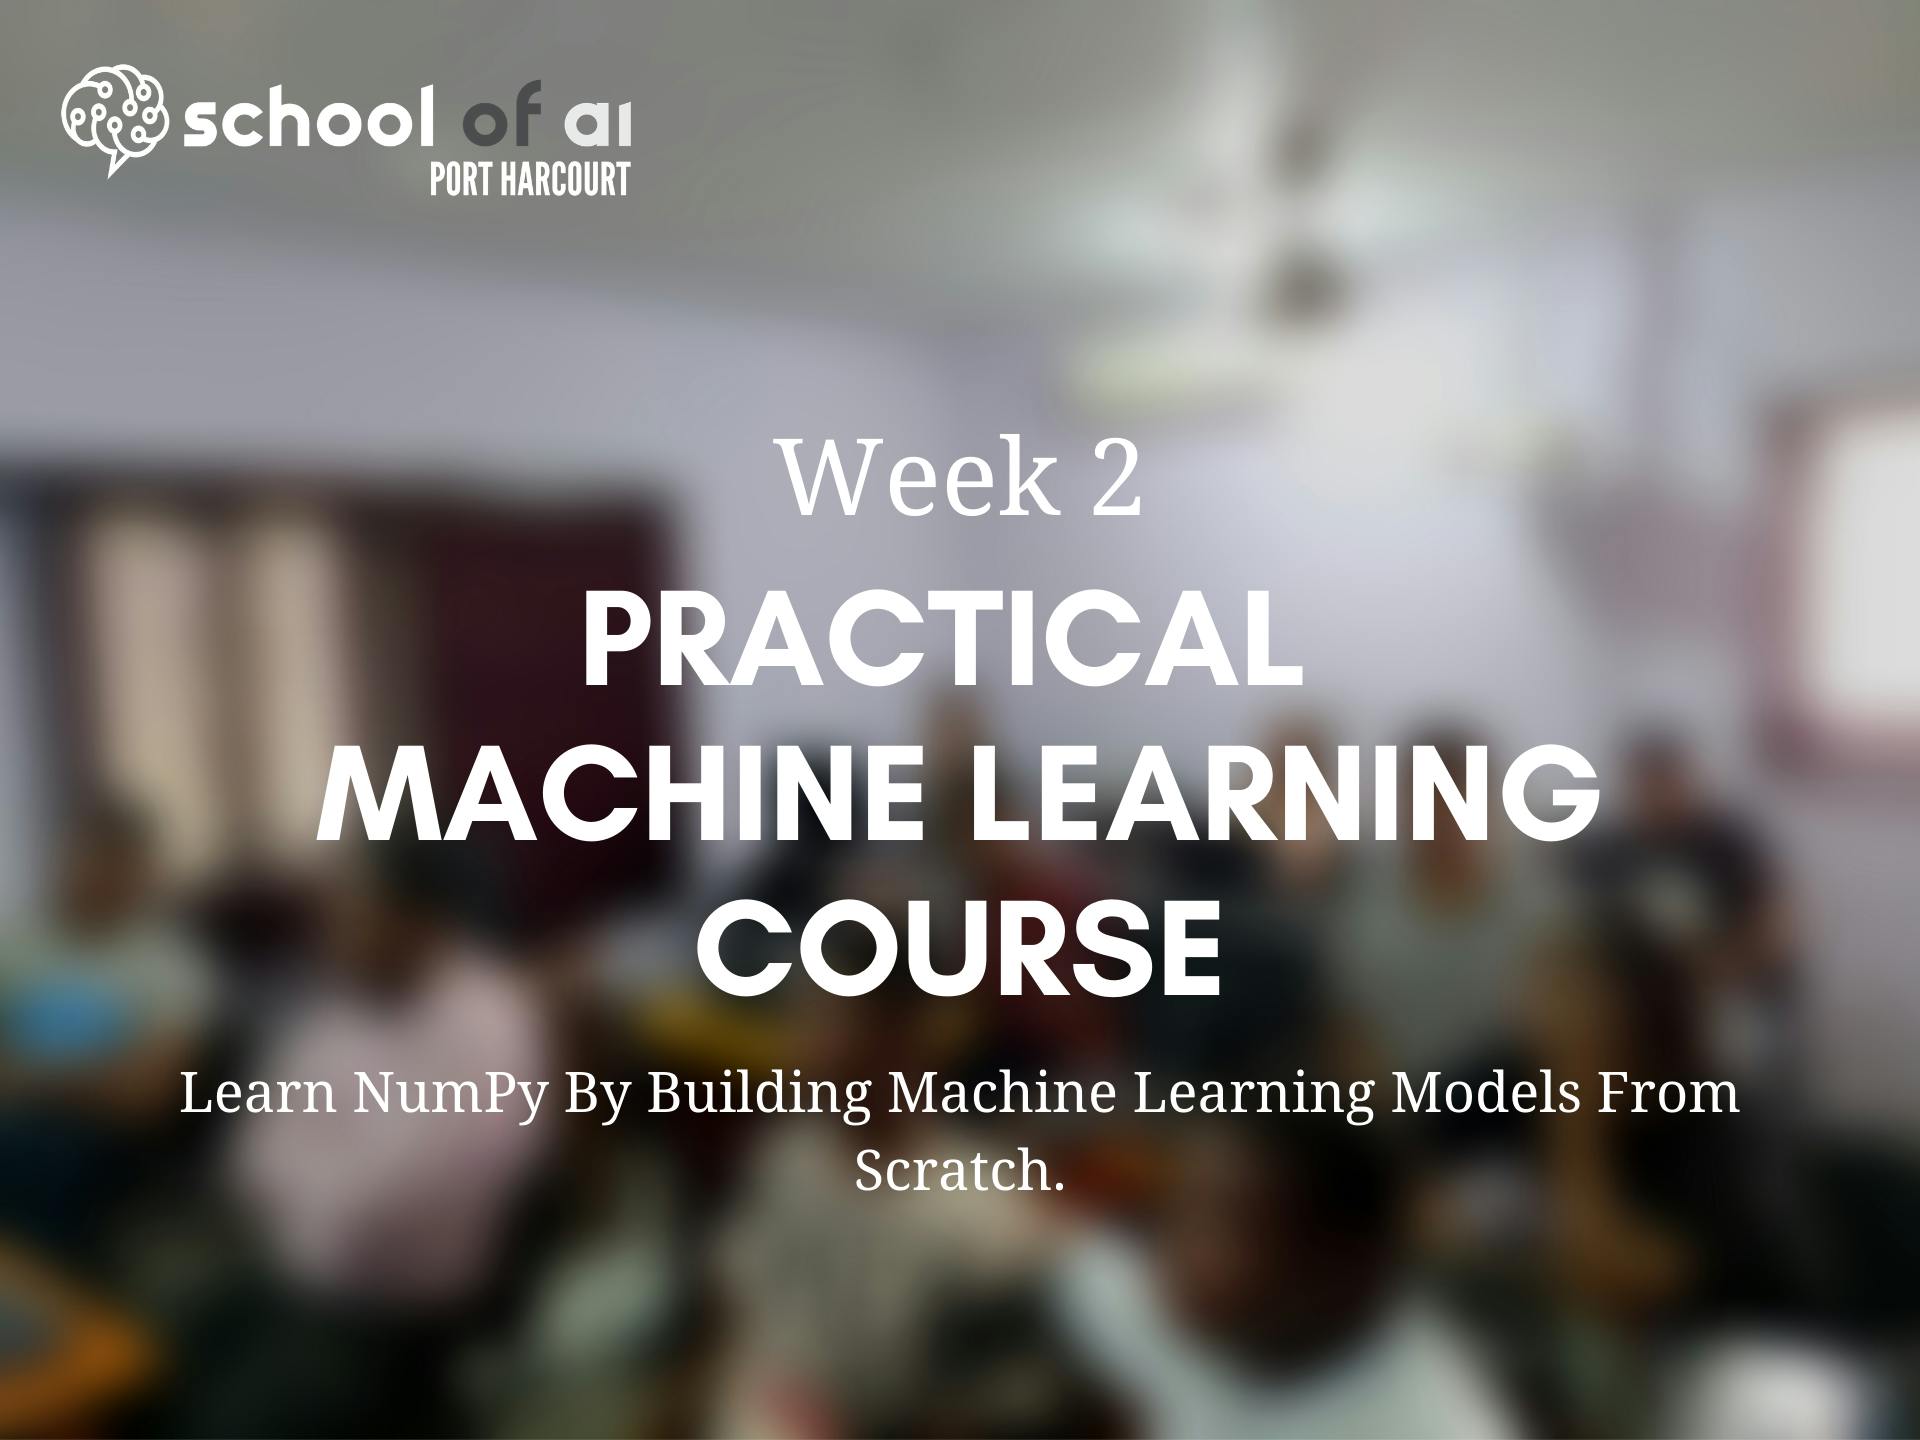 Week 2 Practical Machine Learning Course Highlights